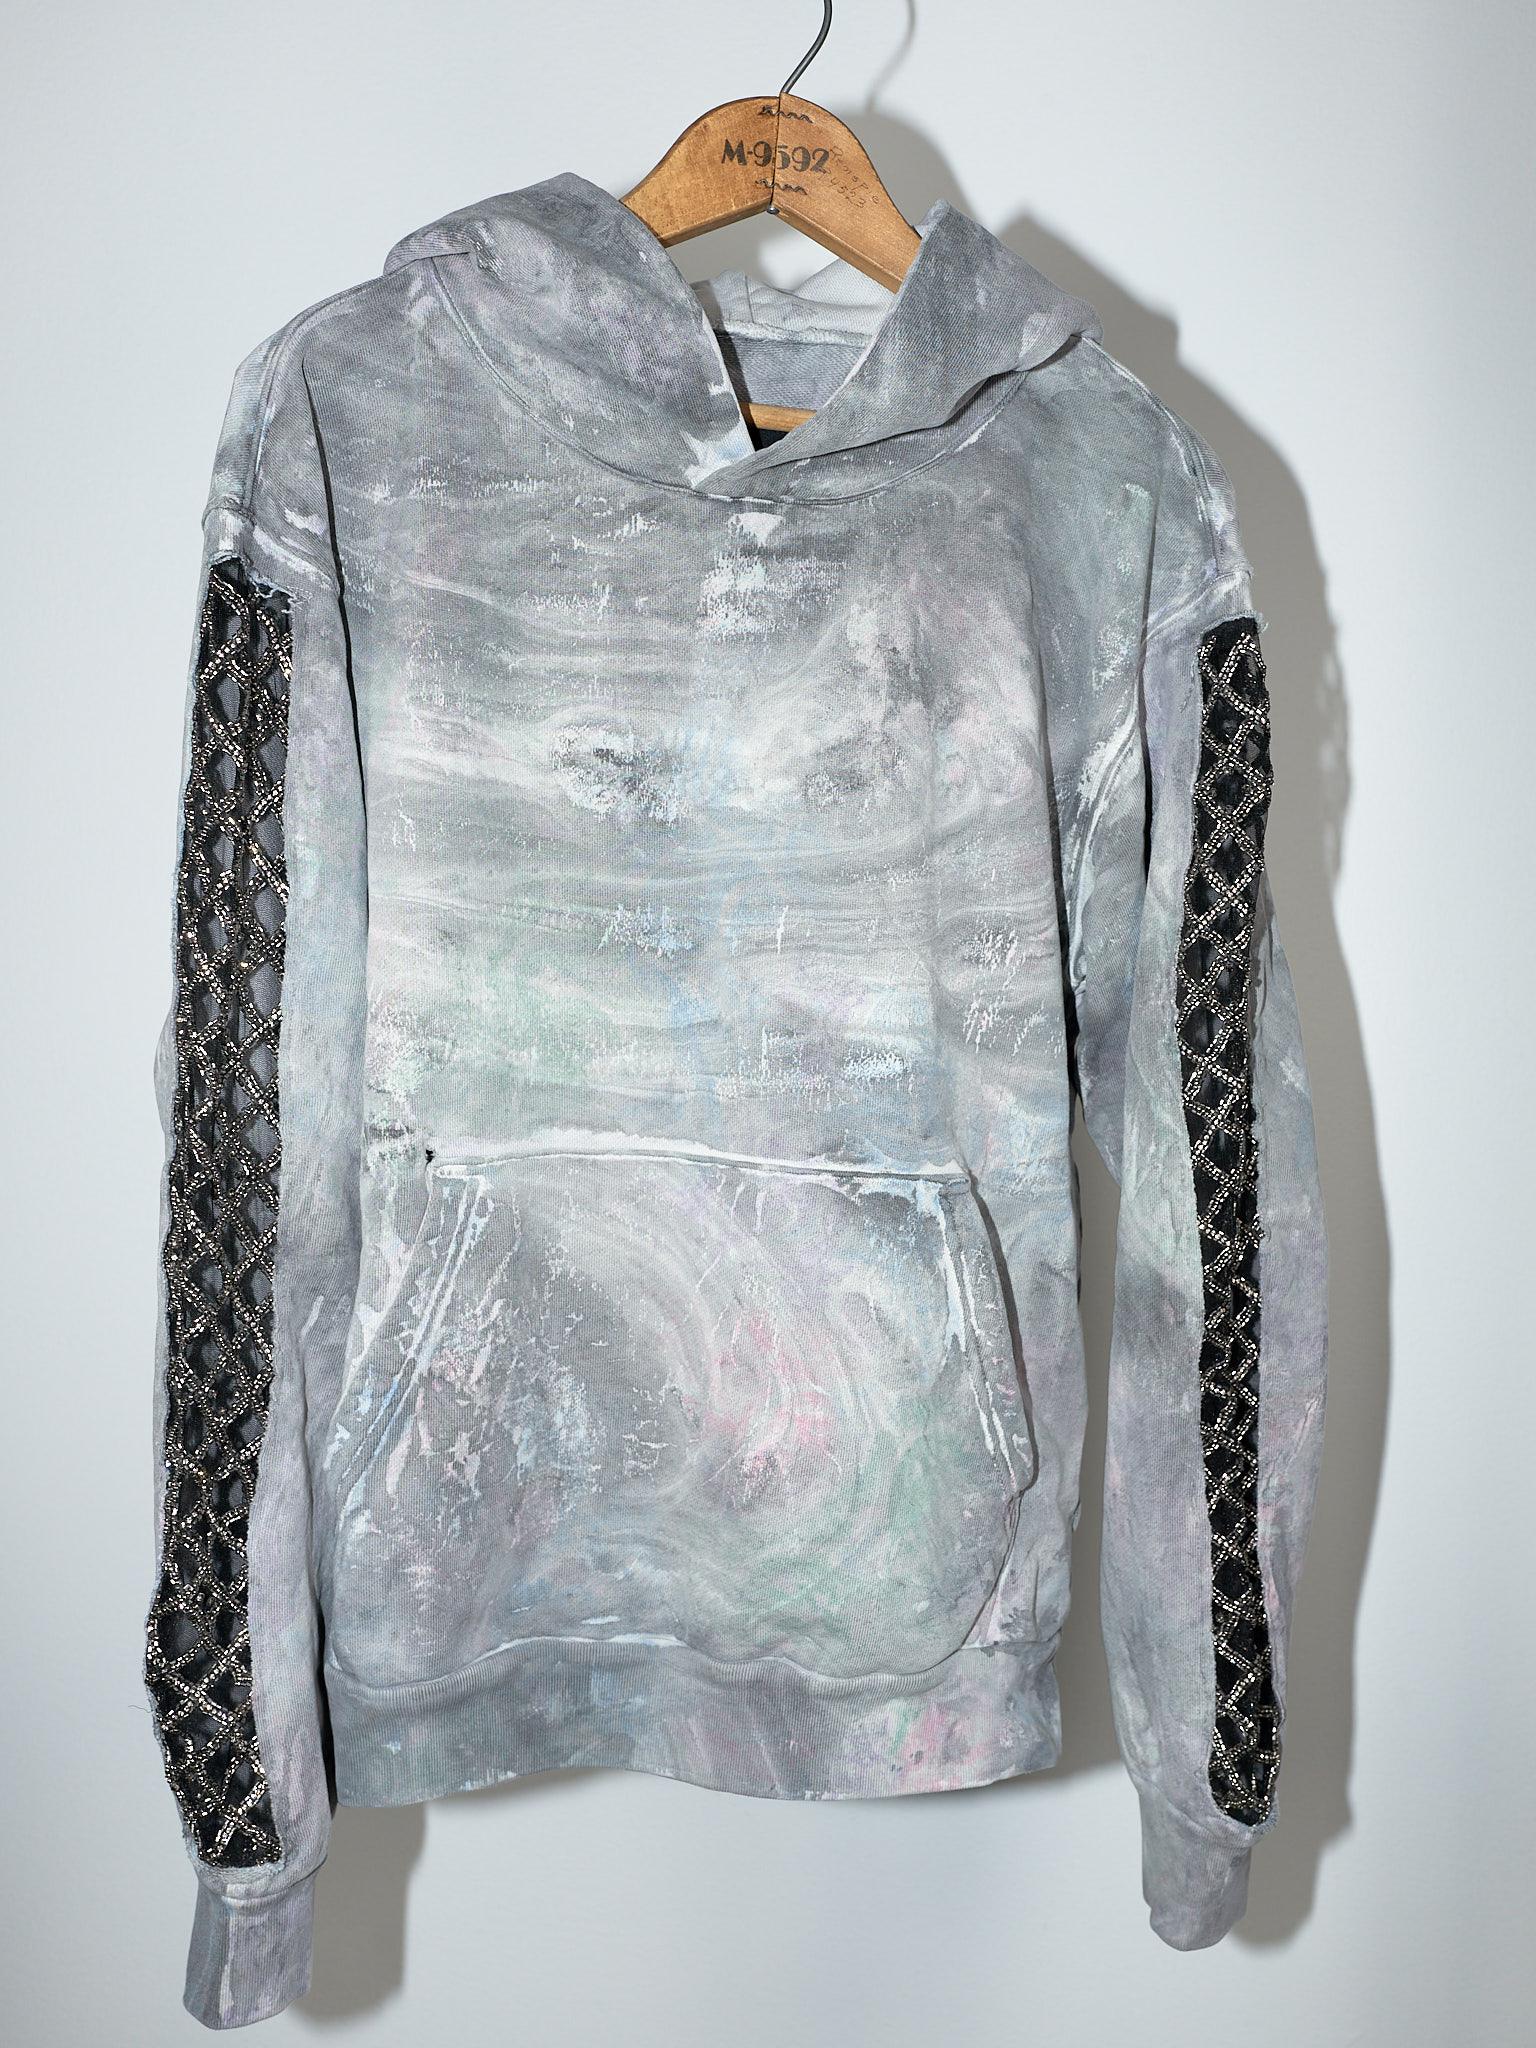 Brand: J Dauphin
Embellished J Dauphin - Grey Marble Dye with Light Pastel Undertones Hoodie
Material: 100% Organic Cotton 
Embellished Sleeve

J Dauphin was created 2006 by Swedish French Johanna Dauphin. She started her career working for LVMH